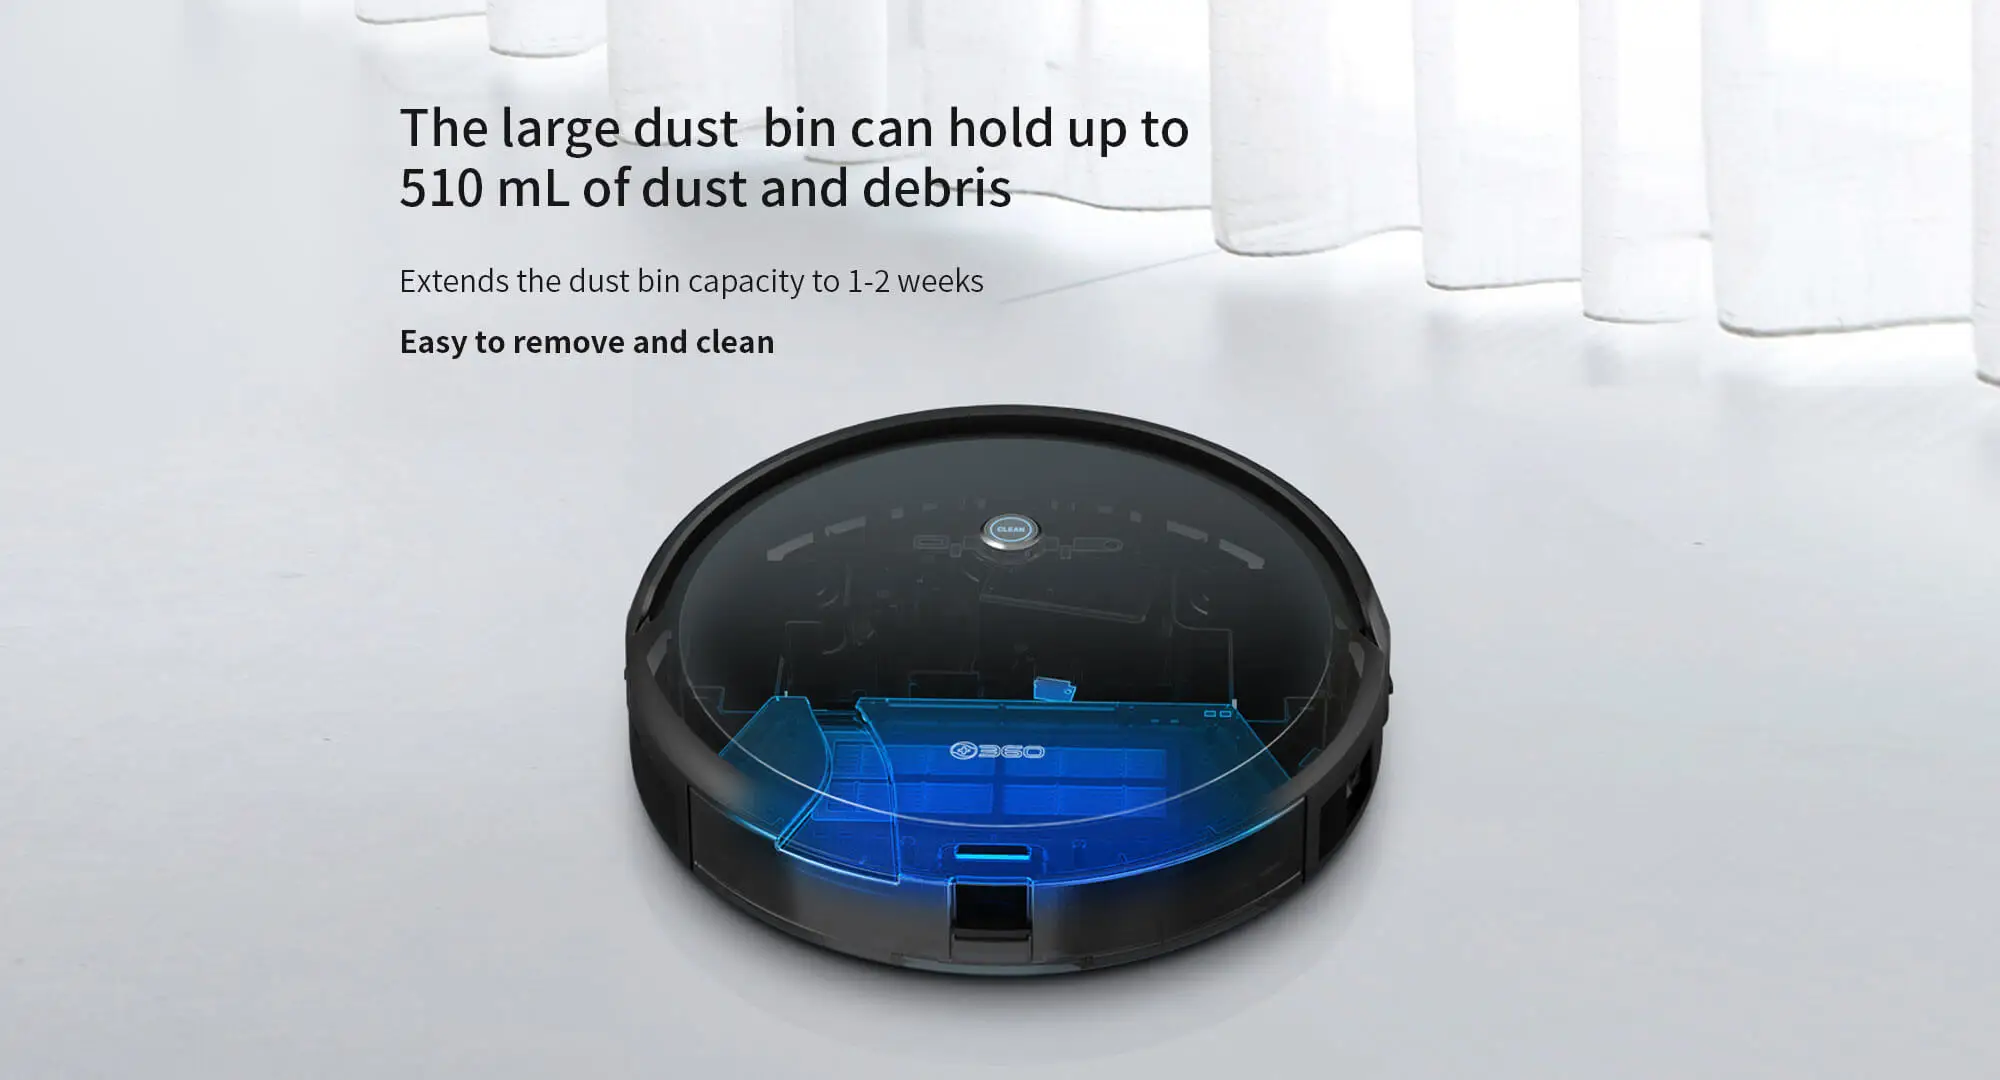 360 C50 Robot Vacuum Cleaner Home Housekeeping Appliances Wet Mop Water Tank Commercial AI Map Navigation APP Control